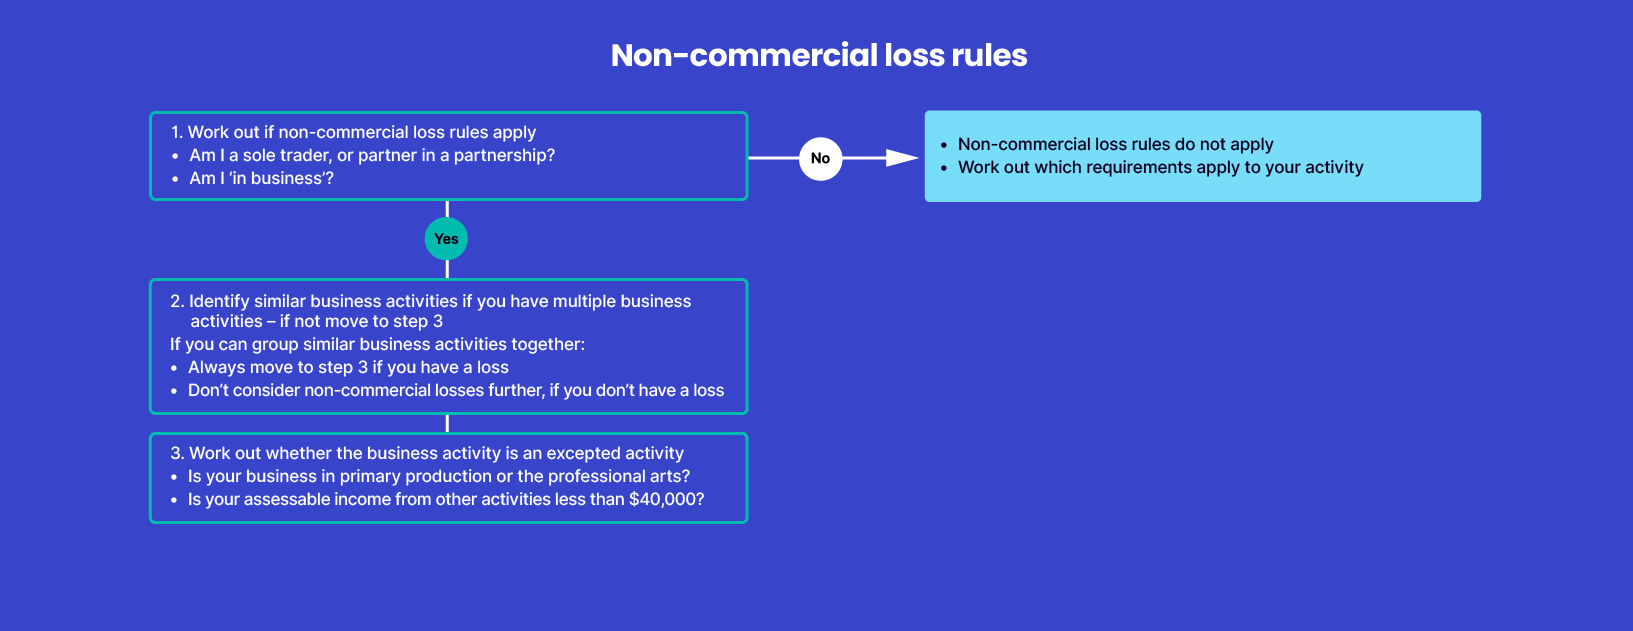 Diagram representing the non-commercial loss rules. In step 2, you identify whether you have similar business activities. If you don’t have similar activities, then move to step 3. If you have similar business activities, and still have a loss, move to step 3. If you don’t have a loss, you don’t consider non-commercial losses further.